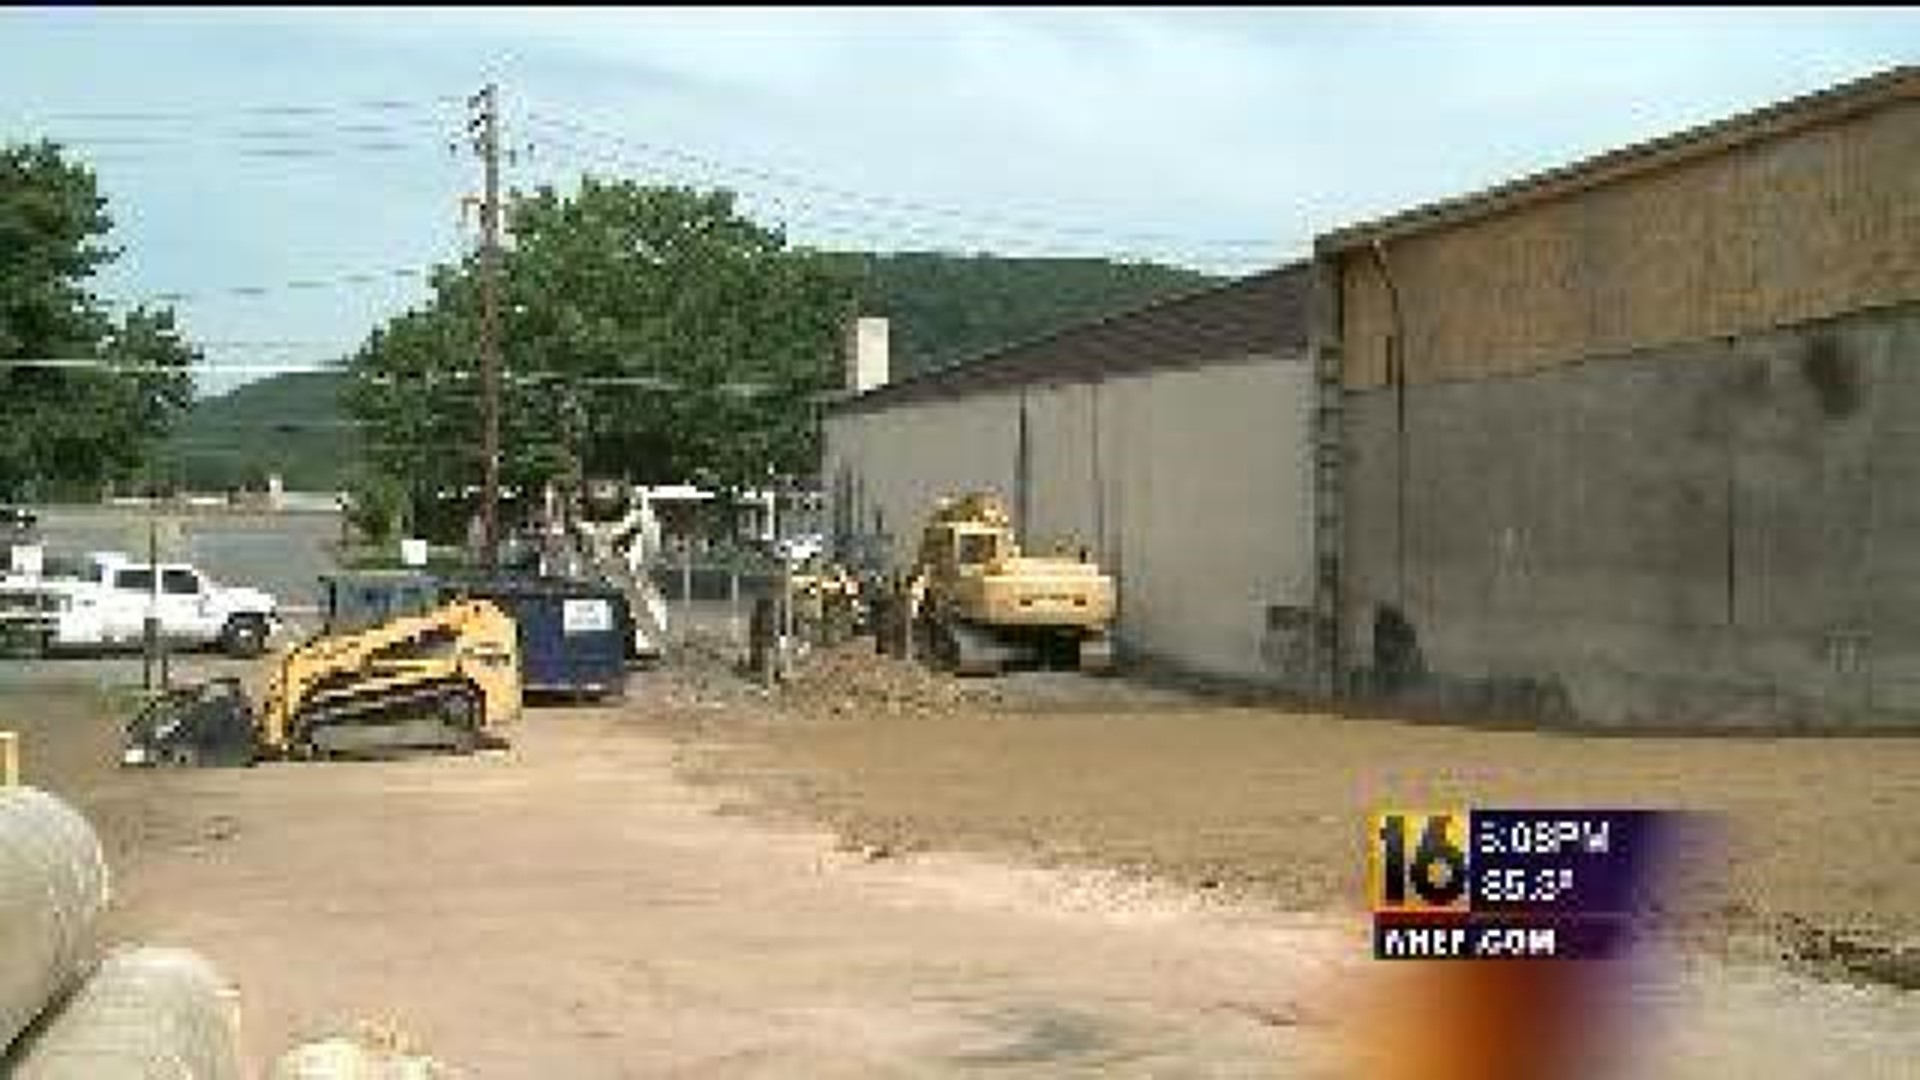 Project to Tear Down Building Complete